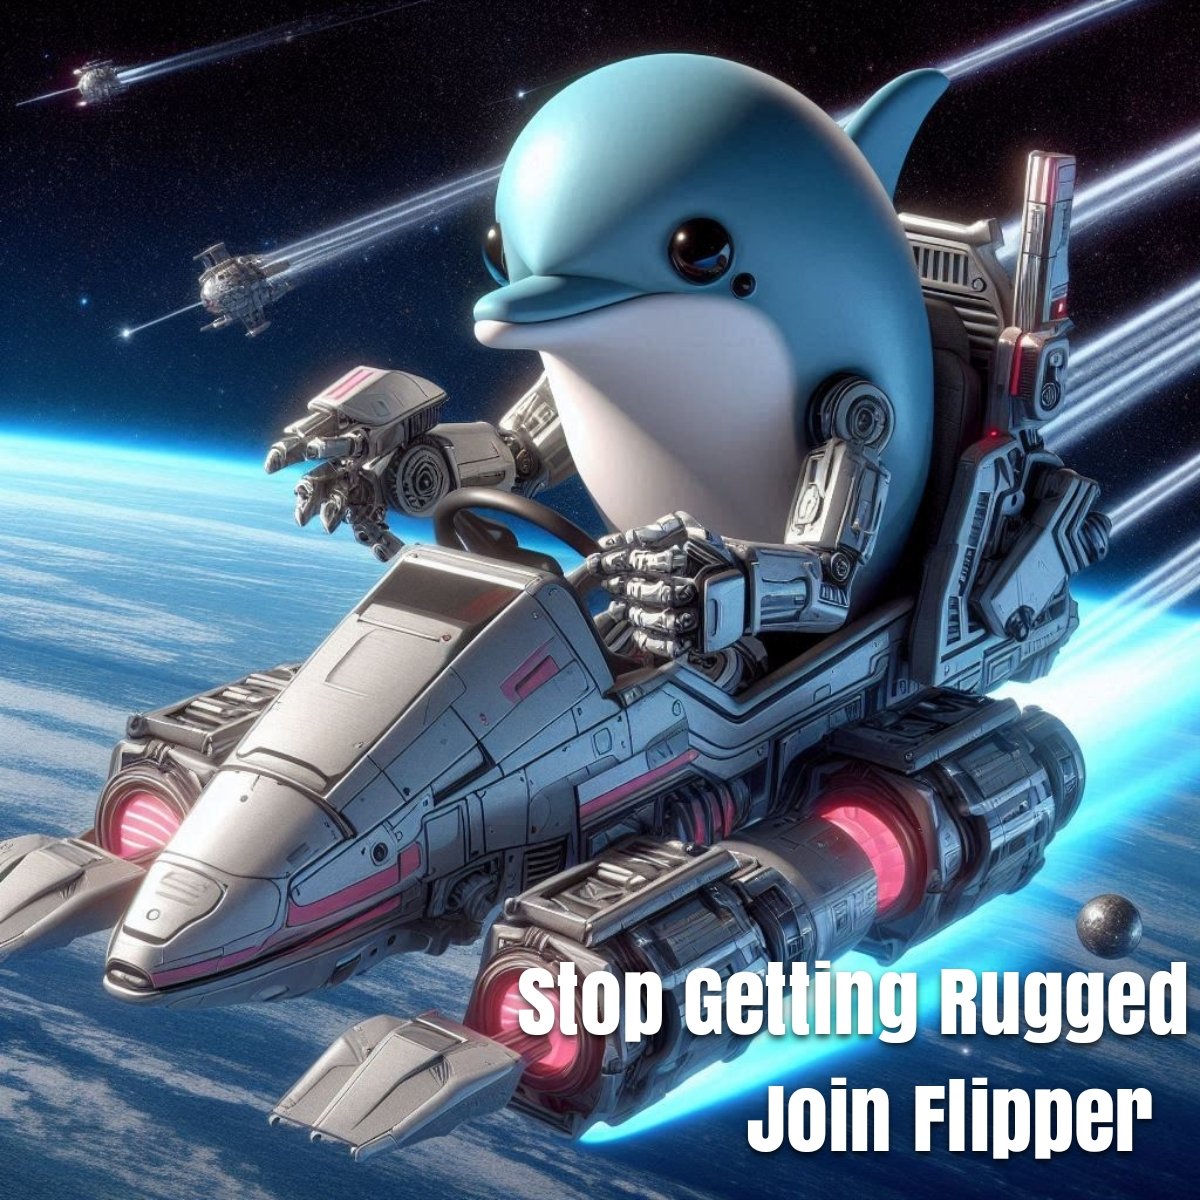 Stop Getting Rugged
Join Flipper
Only 100 Million Supply 

#lunc #shib #Memecoins #cryptocurrency #MemeTokens #ElonMusk #elondoge #pepe   #CryptoNews #Giveaways #CryptoCommunity  #dextools #altcoin #altcoinseason  #SOL #ETH #dexscreener #airdrop